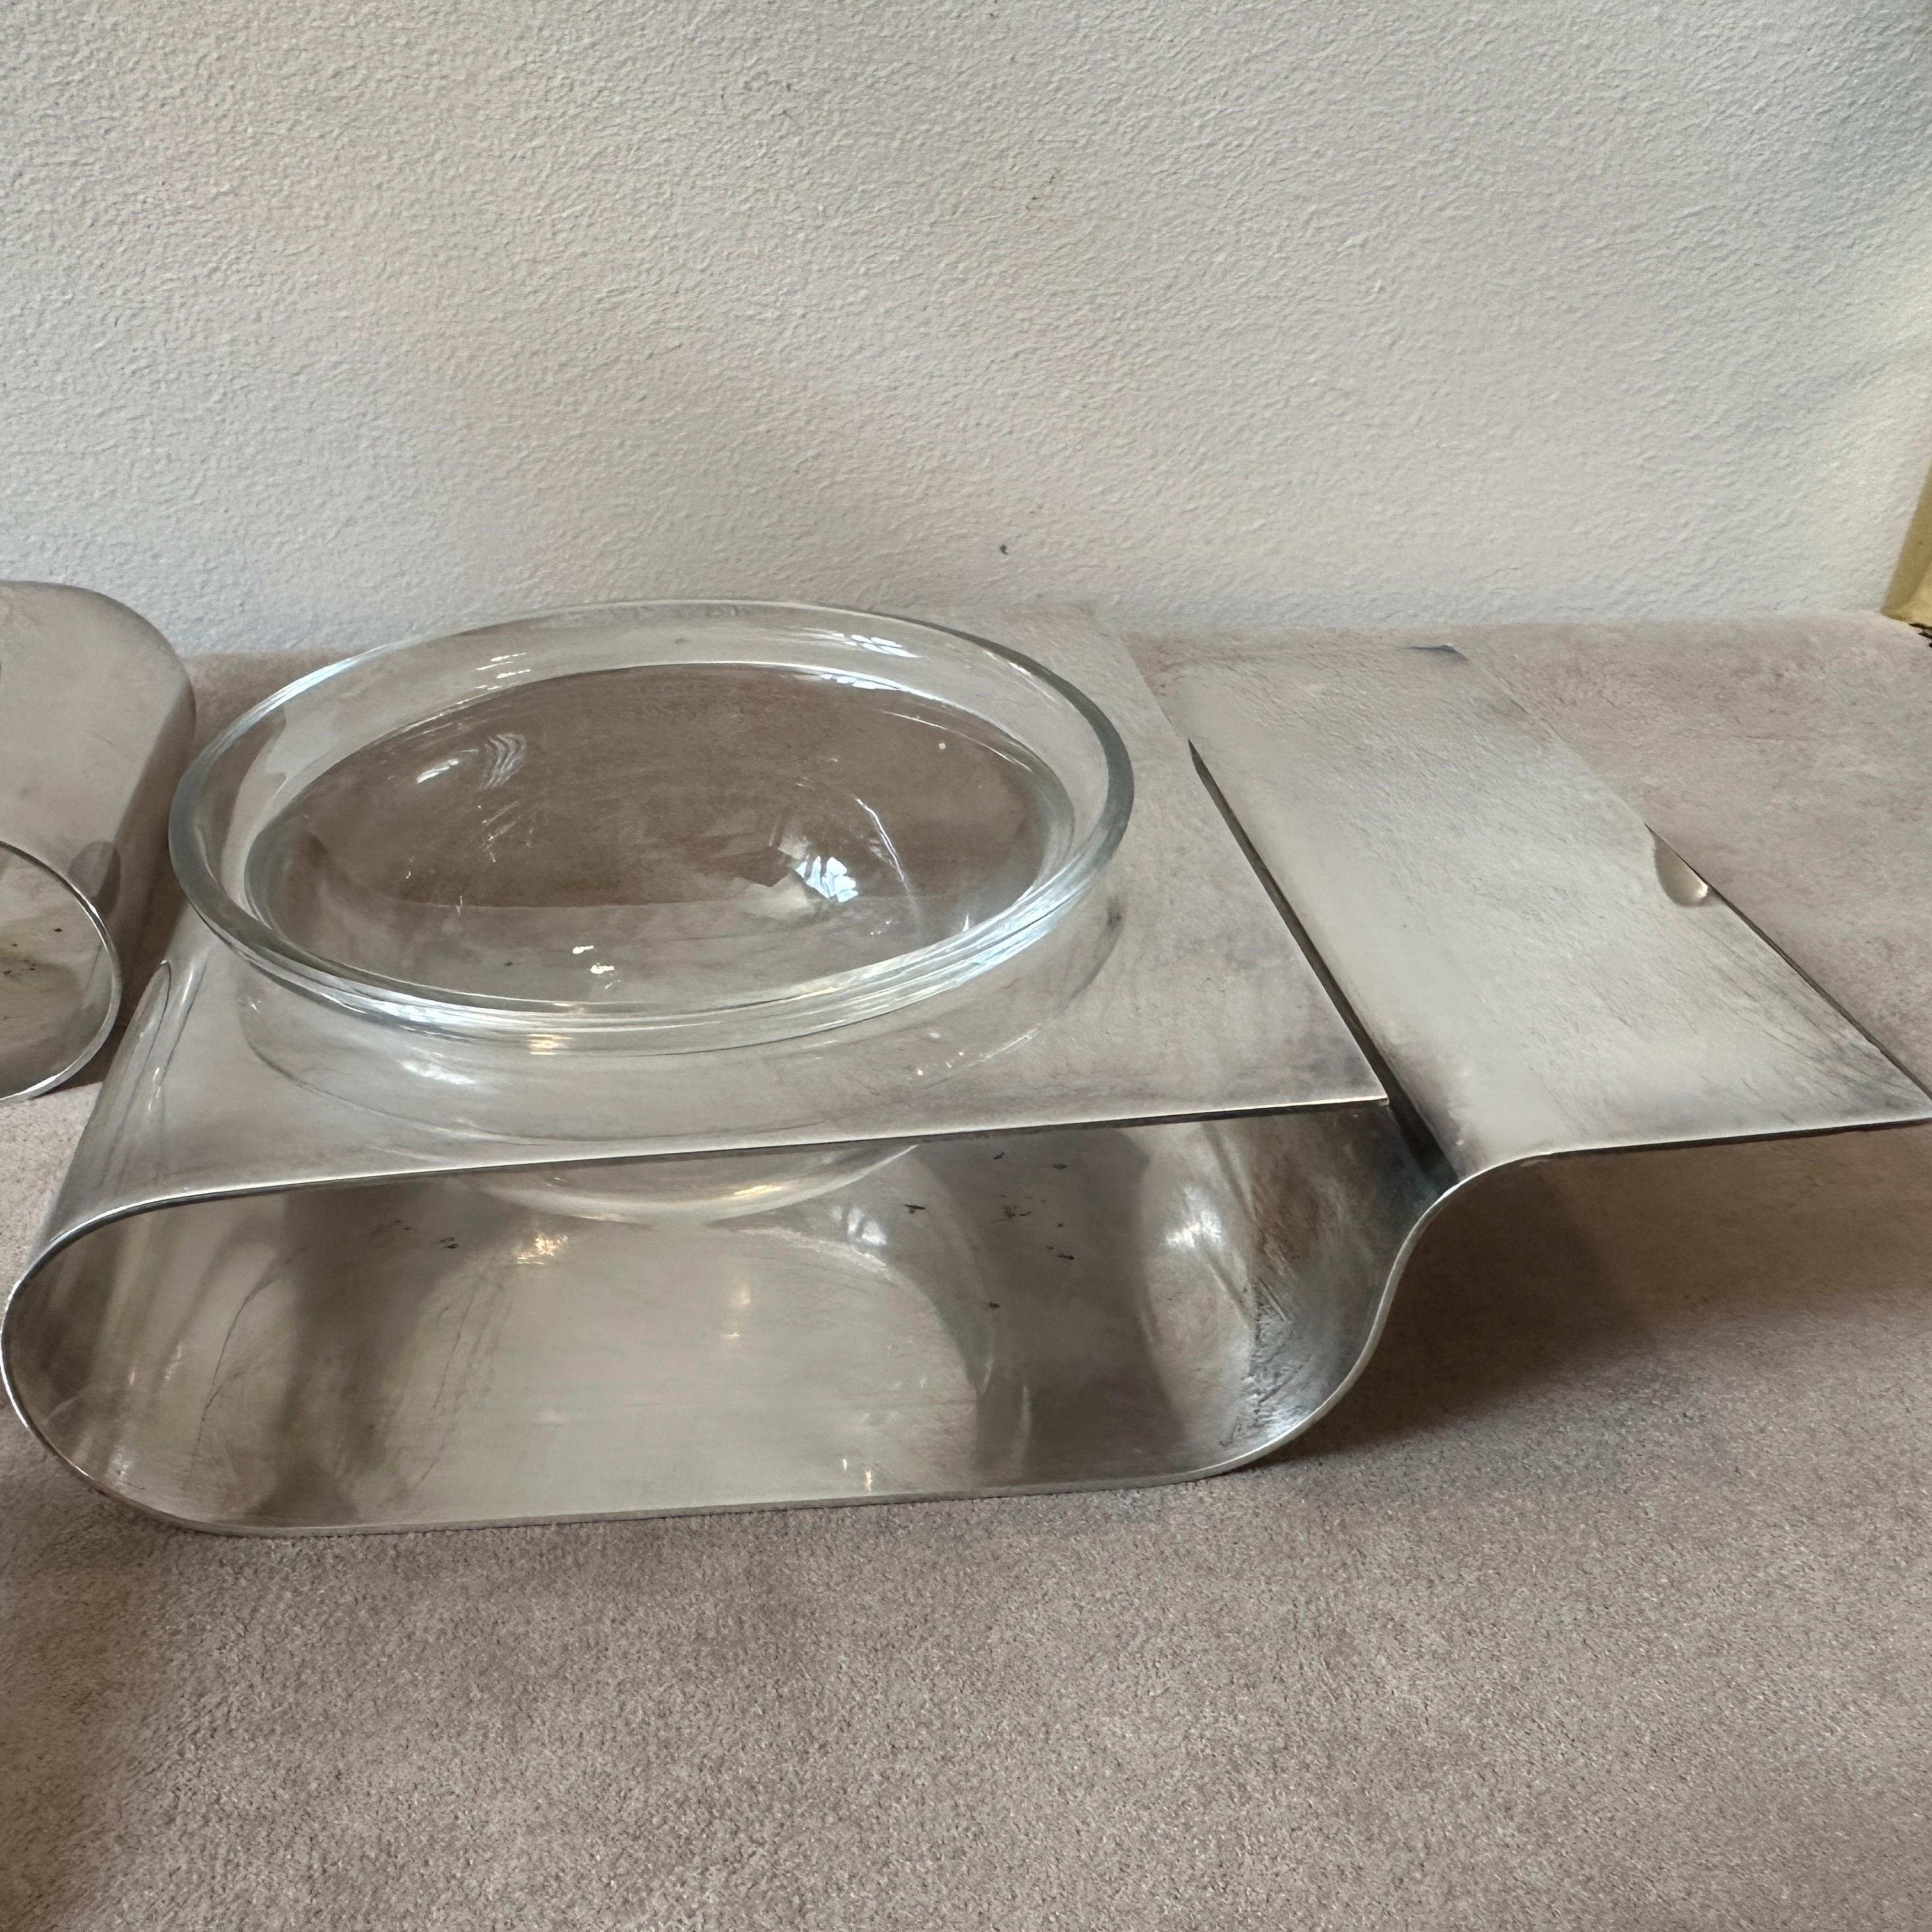 Three 1980s Modernist Silver Plated and Glass Serving Pieces by Lino Sabattini In Good Condition For Sale In Aci Castello, IT